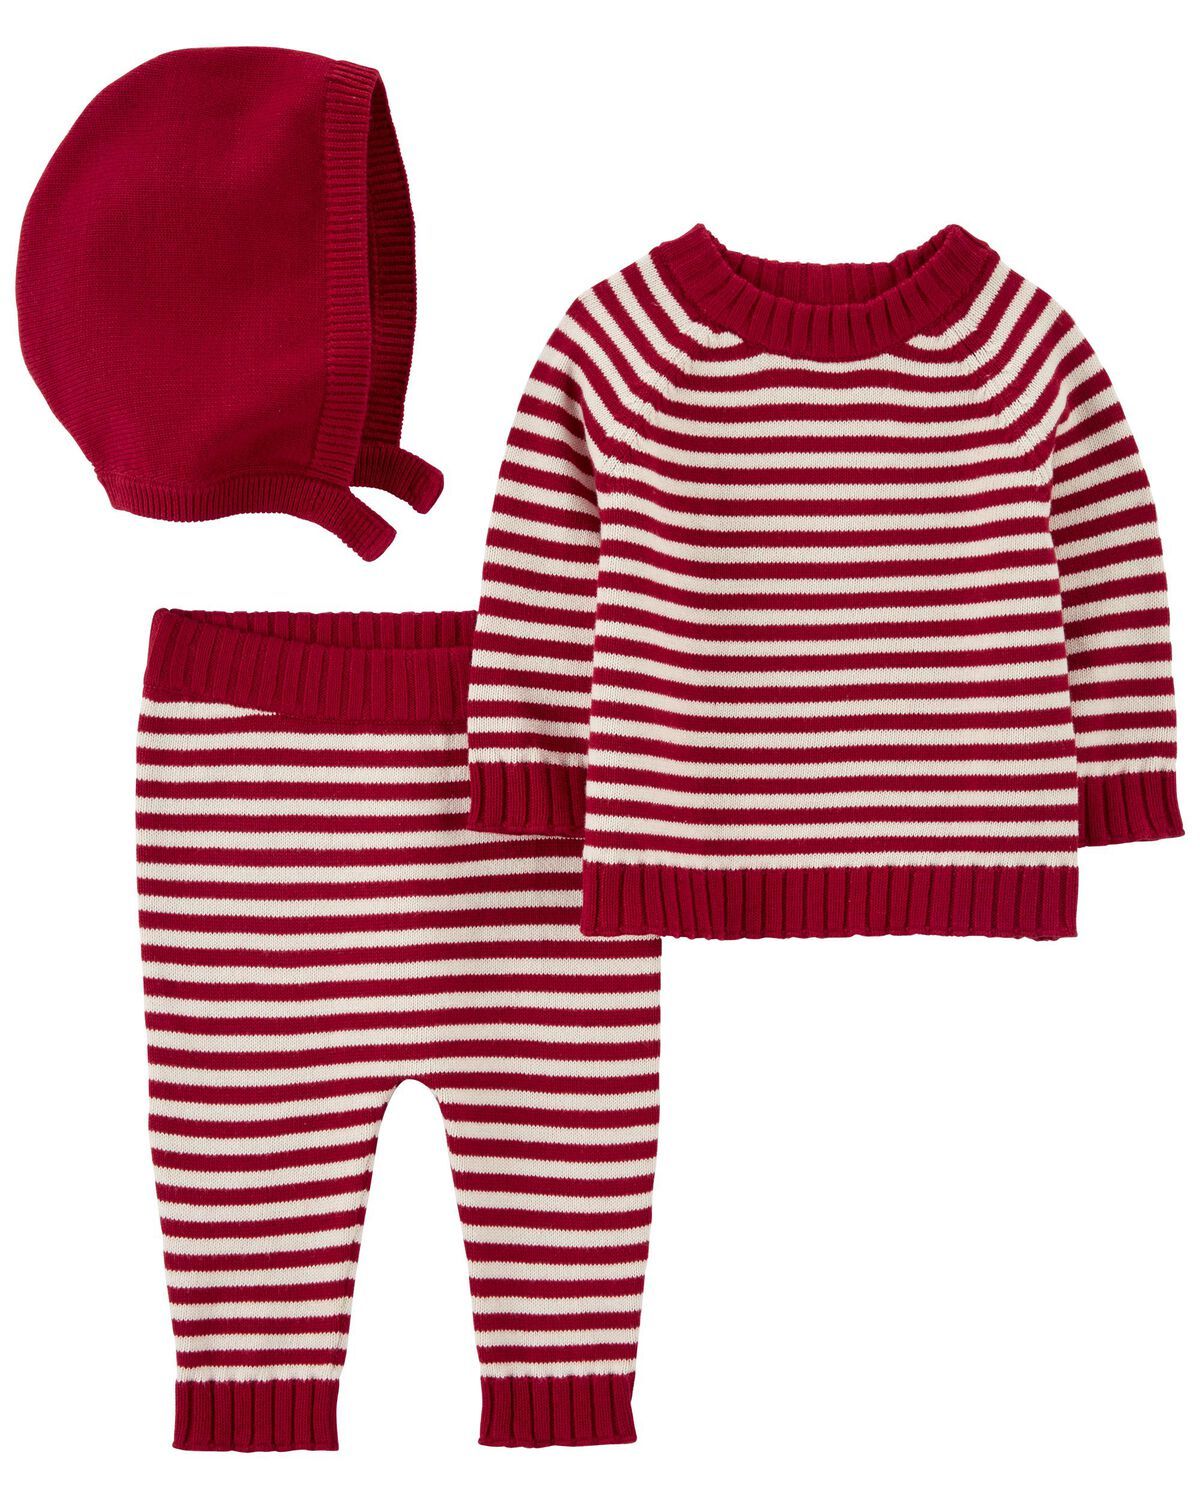 Red/White Baby 3-Piece Holiday Outfit Set | carters.com | Carter's